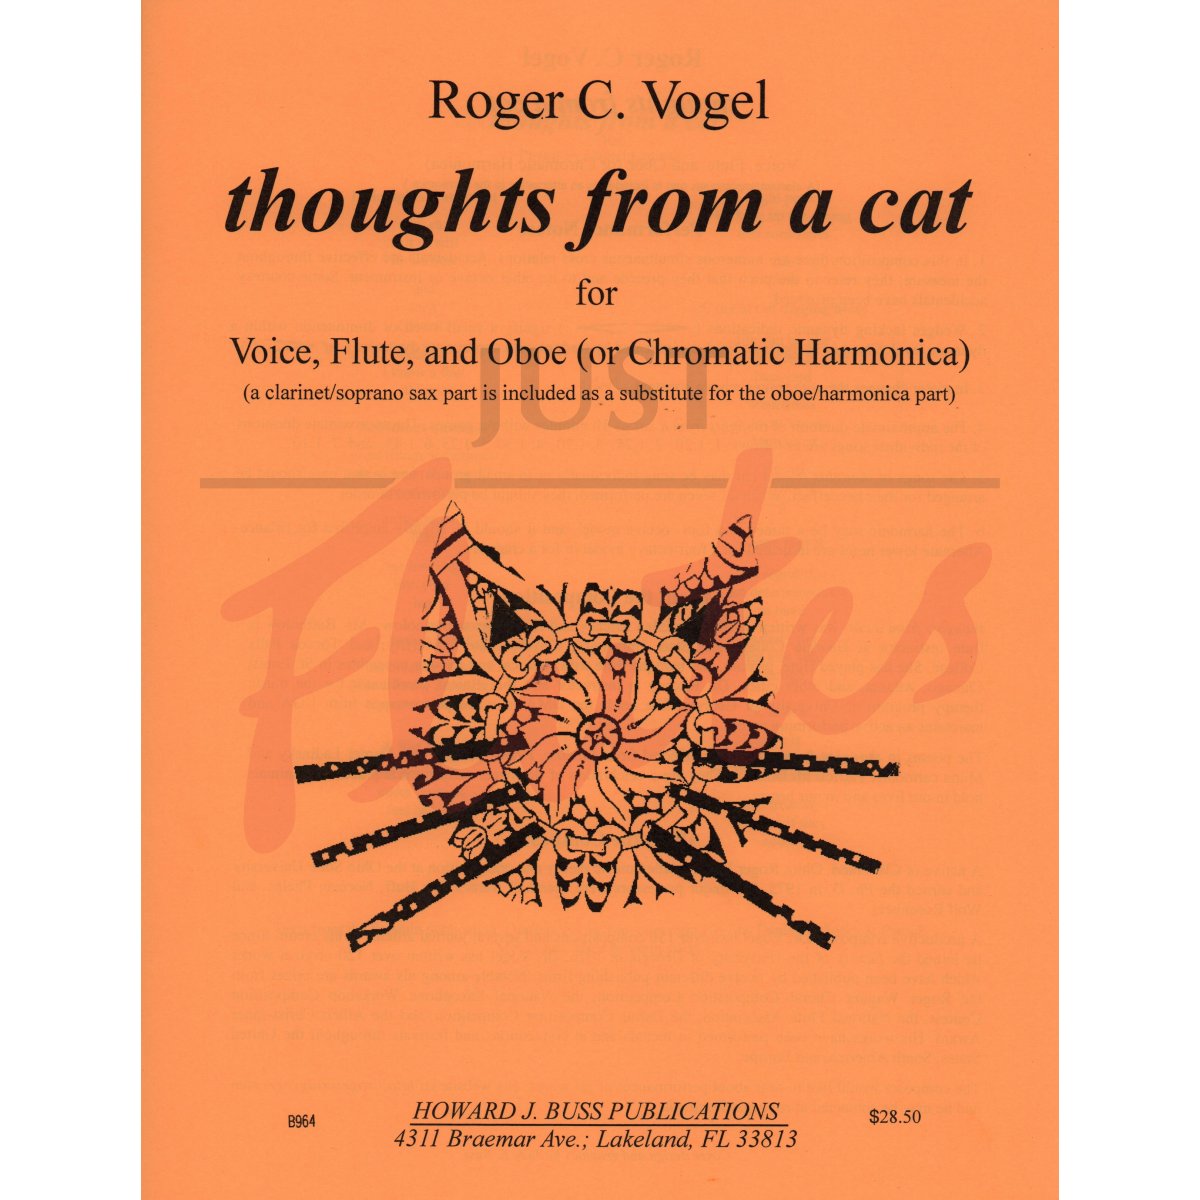 Thoughts from a Cat for Flute, Oboe and Voice